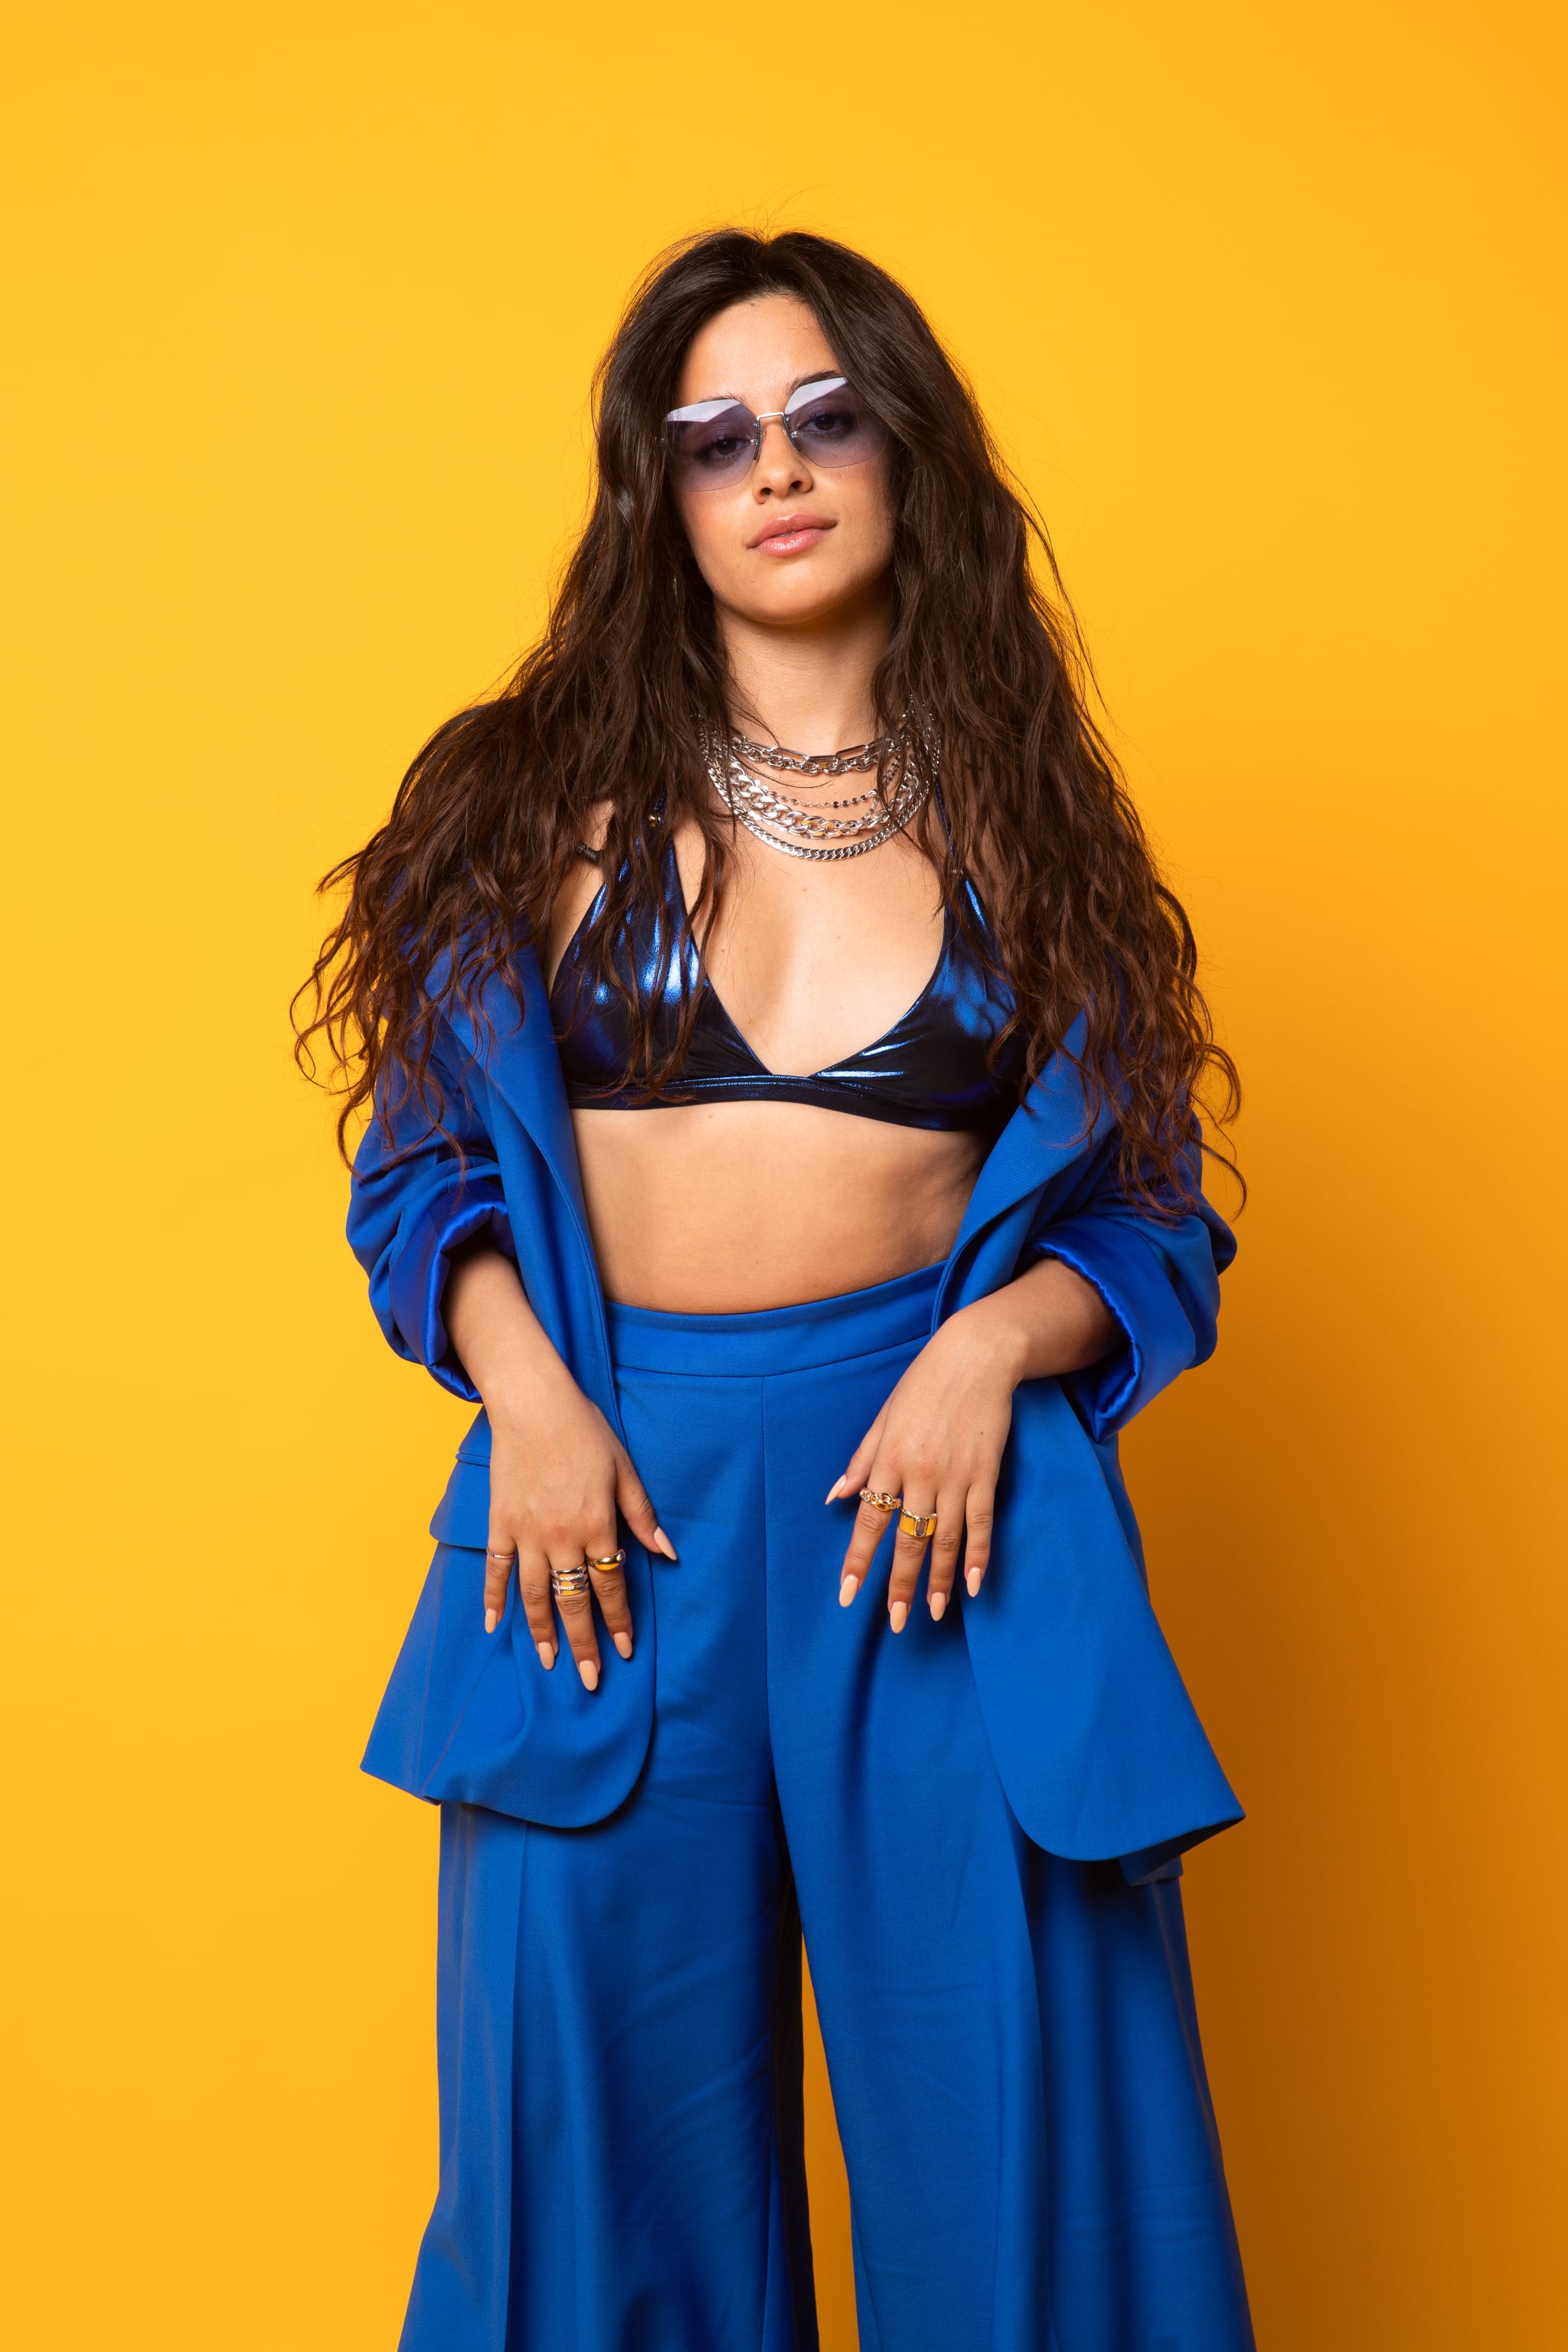 BIRMINGHAM, ENGLAND - MARCH 29: Camila Cabello poses backstage during a Concert for Ukraine at Resorts World Arena on March 29, 2022 in Birmingham, England. All proceeds from Concert for Ukraine are being donated to Disasters Emergency Committee's Ukraine Humanitarian Appeal. (Photo by Tristan Fewings/Disasters Emergency Committee/Getty Images for Livewire Pictures Ltd)